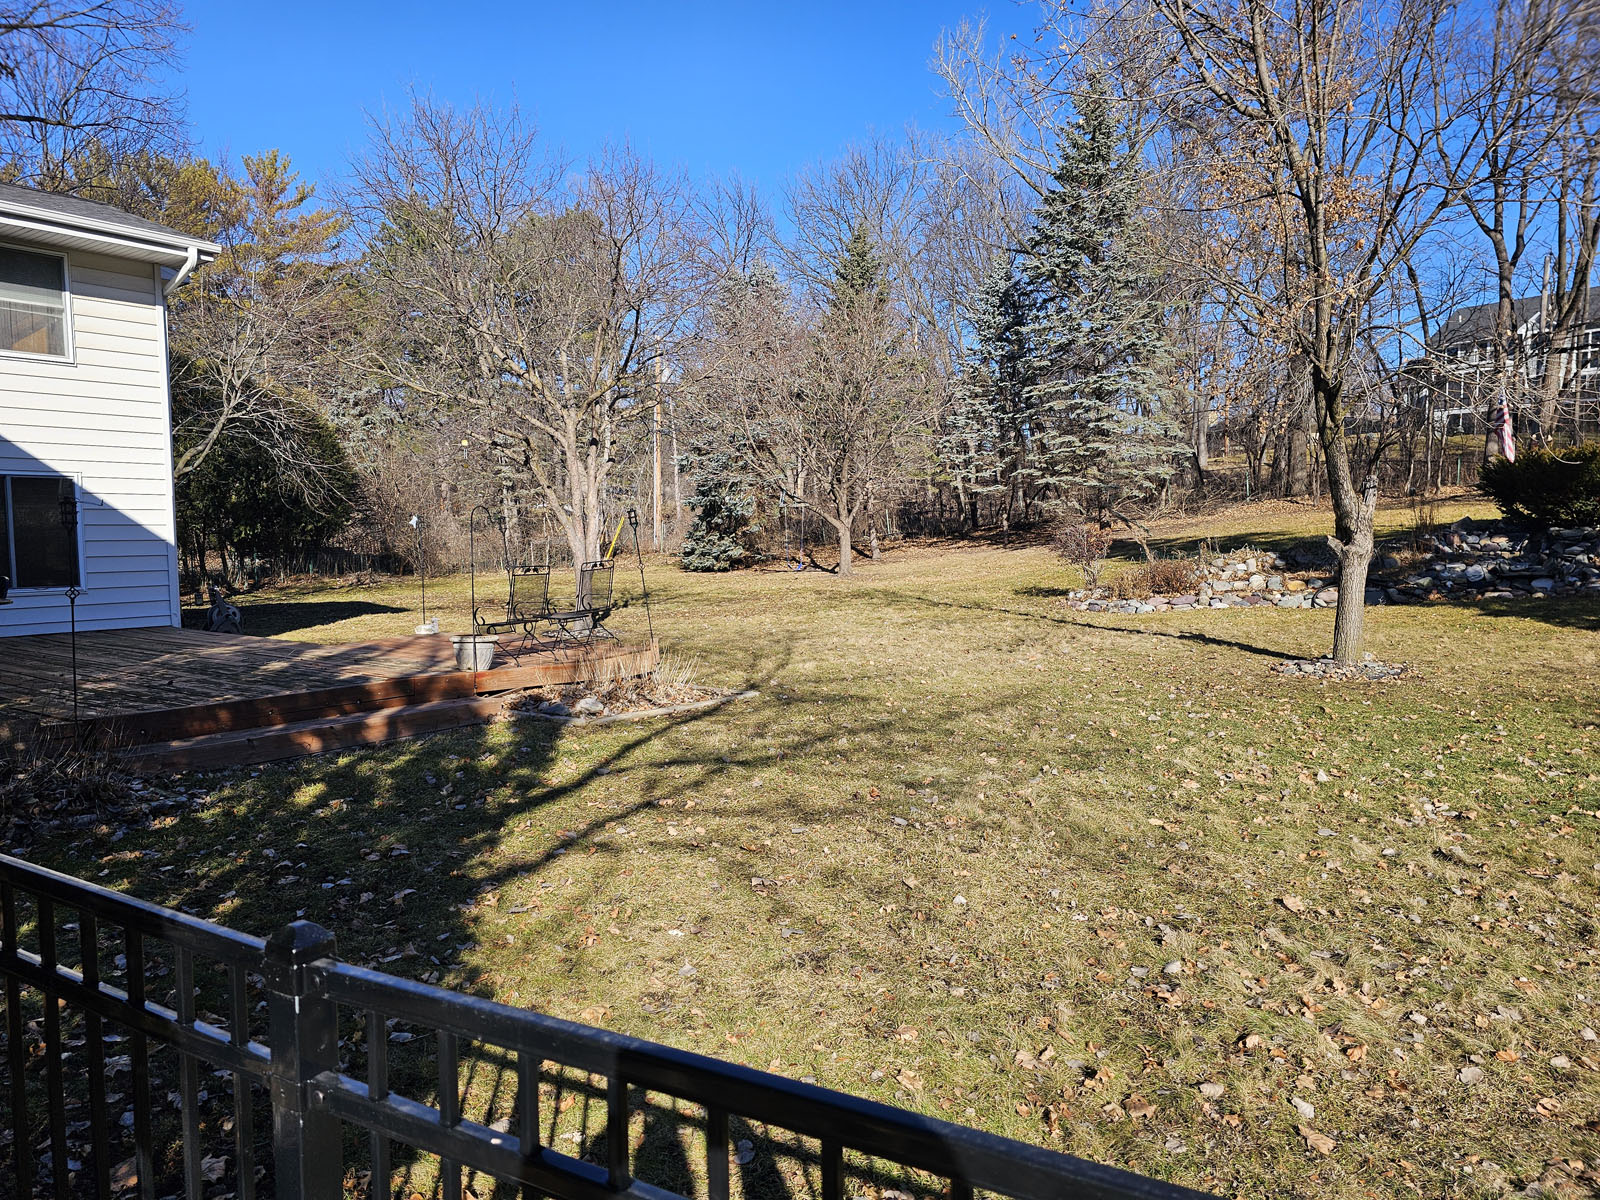 Huge wooded lot to enjoy the space and views